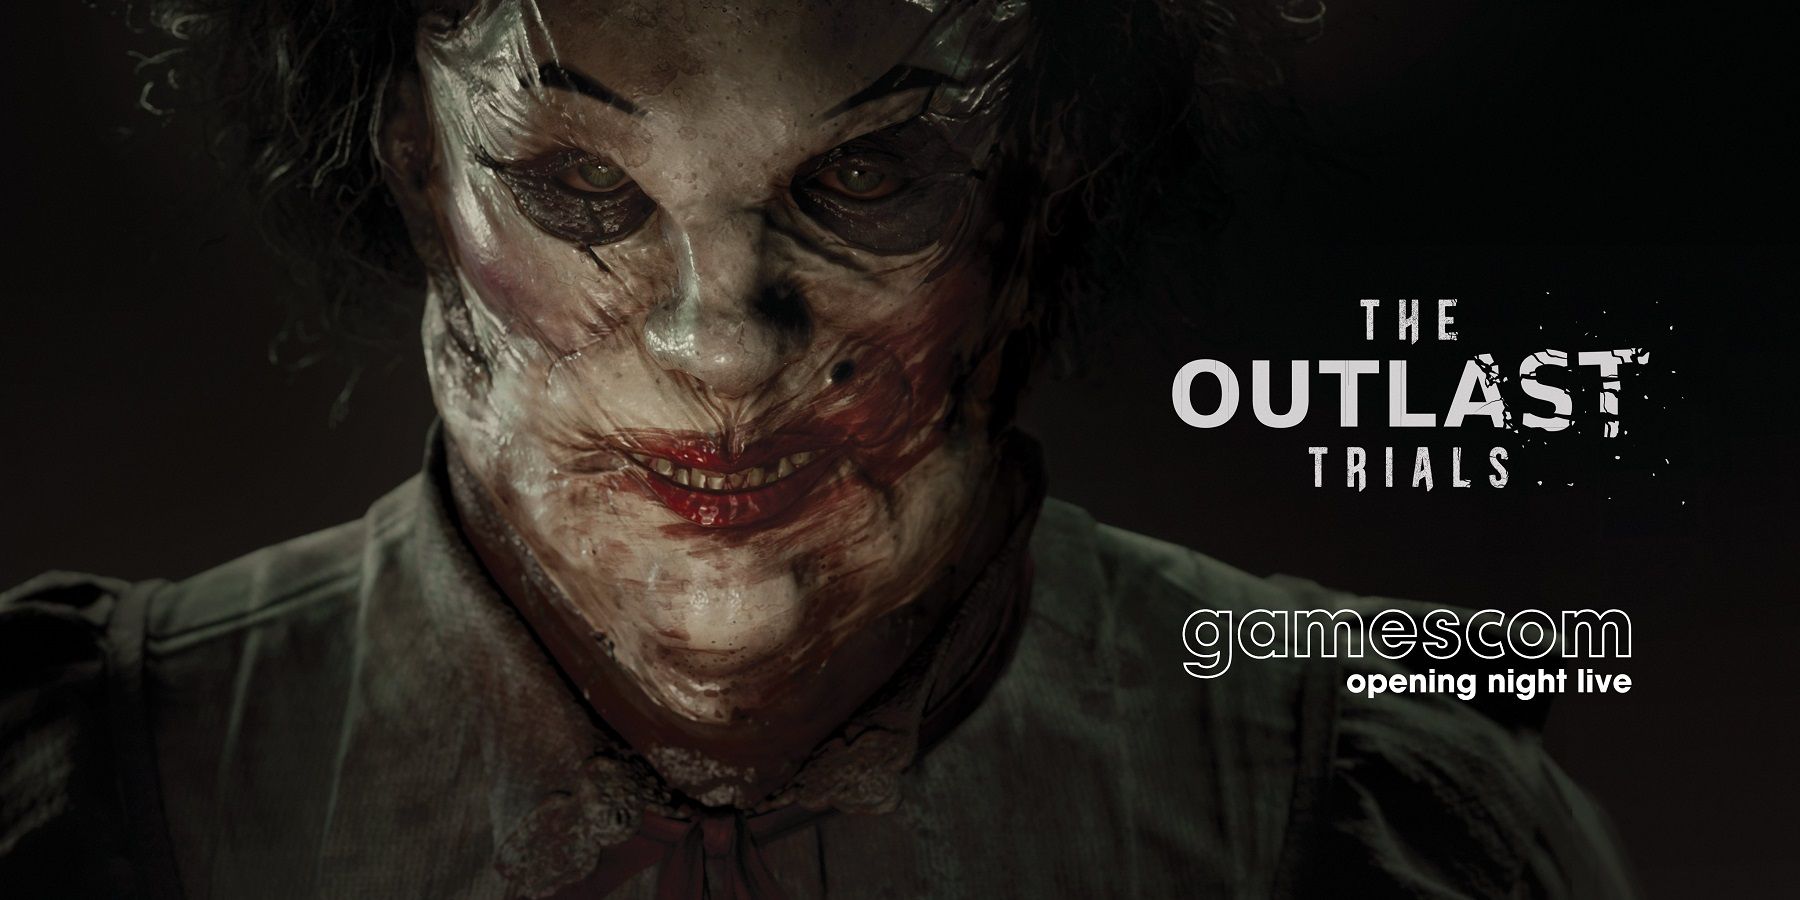 An image from Outlast Trials showing someone wearing a very creepy clown mask.